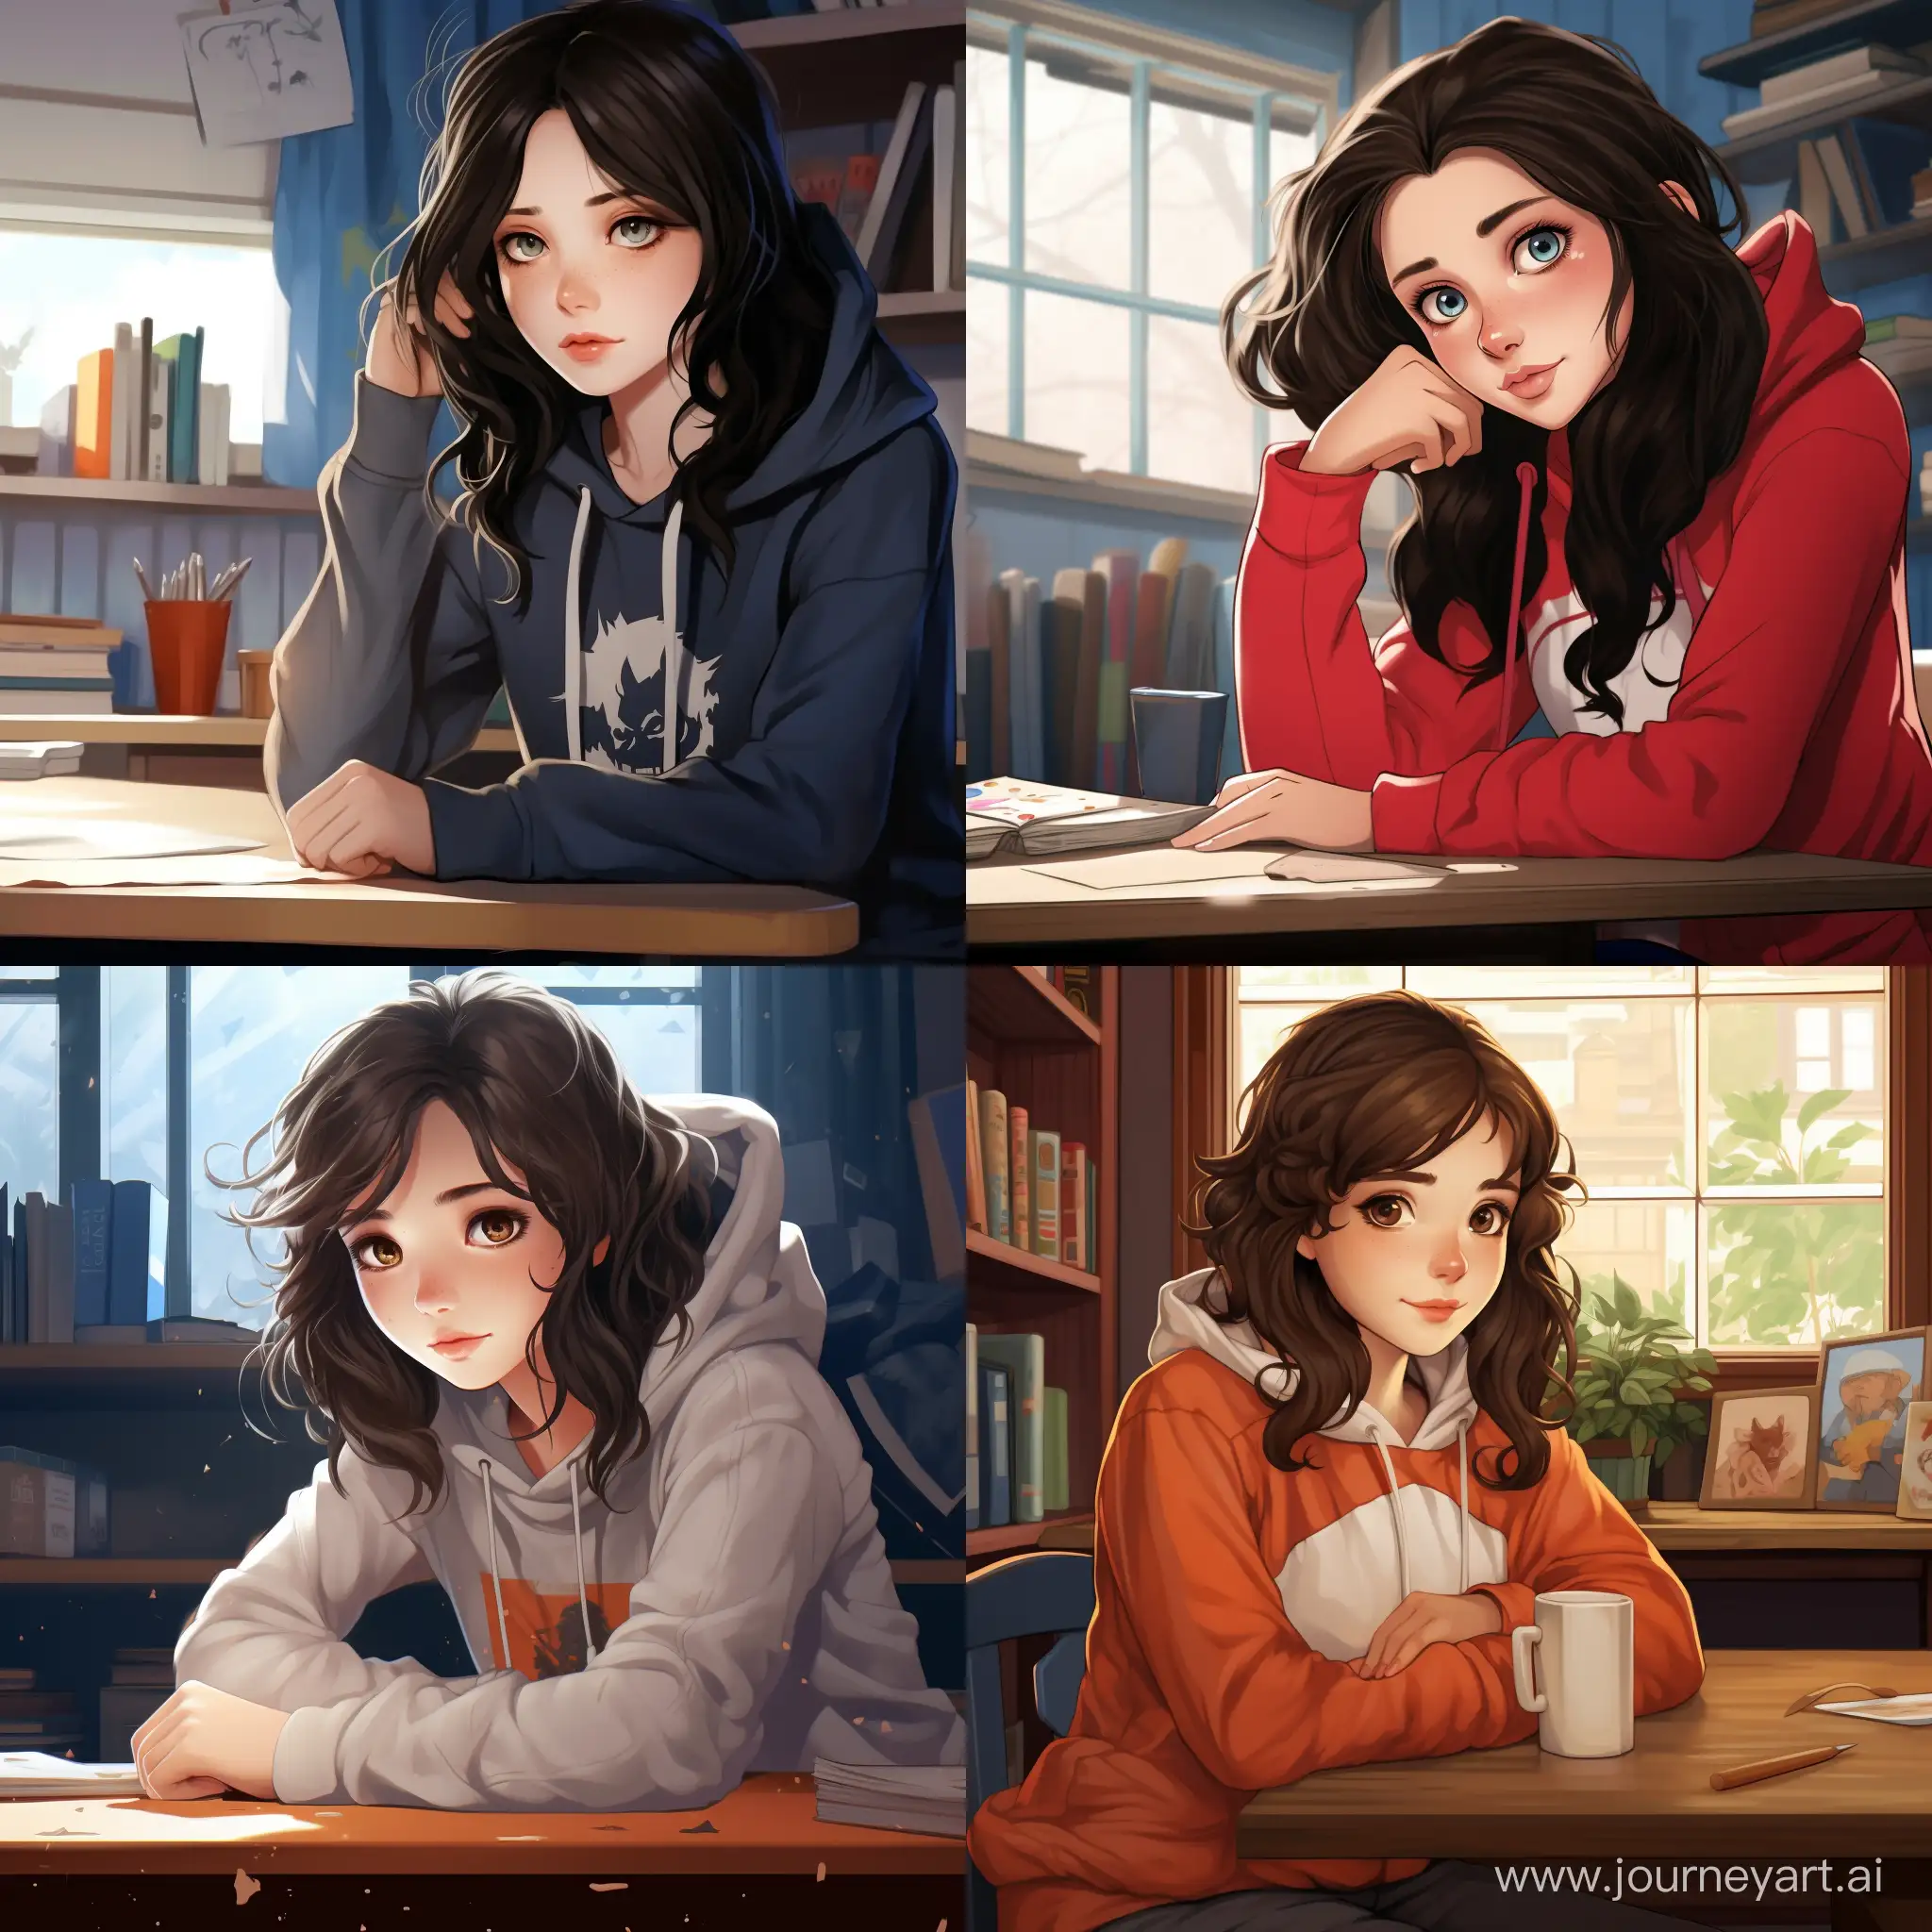 Charming-Teenage-Girl-in-Cartoon-Art-HighQuality-Portrait-at-Classroom-Table